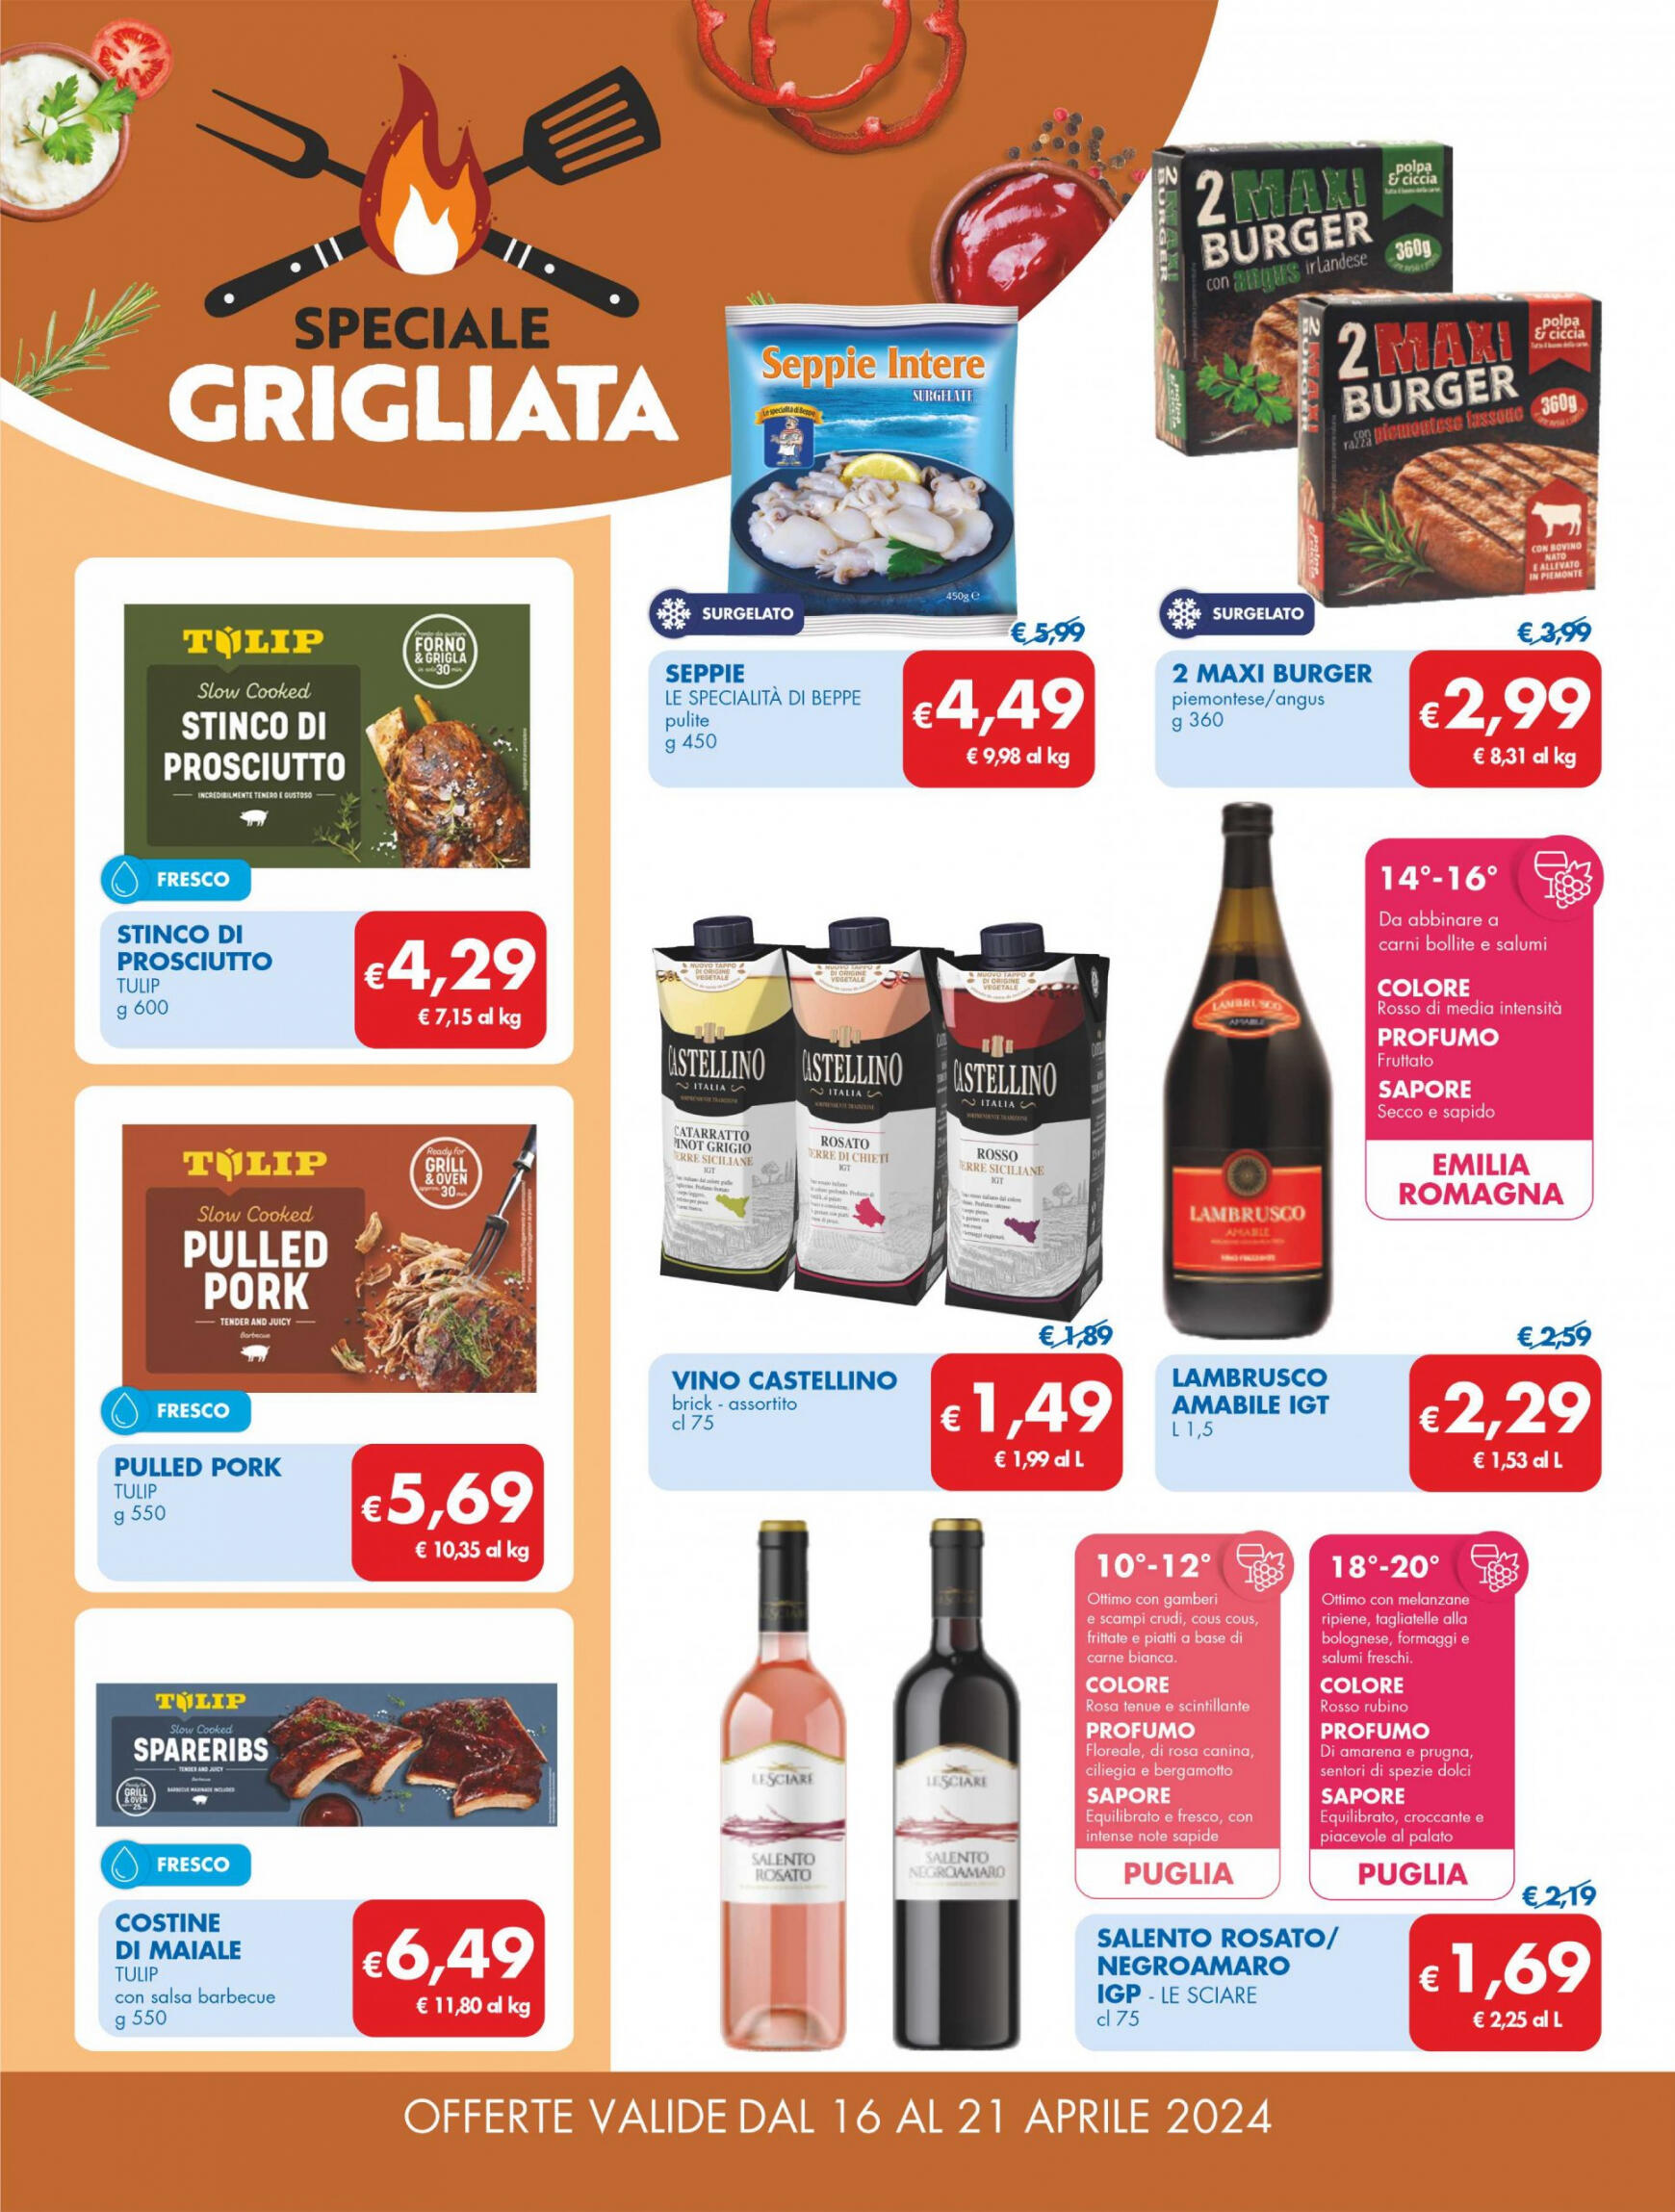 md-discount - Nuovo volantino MD 16.04. - 21.04. - page: 4